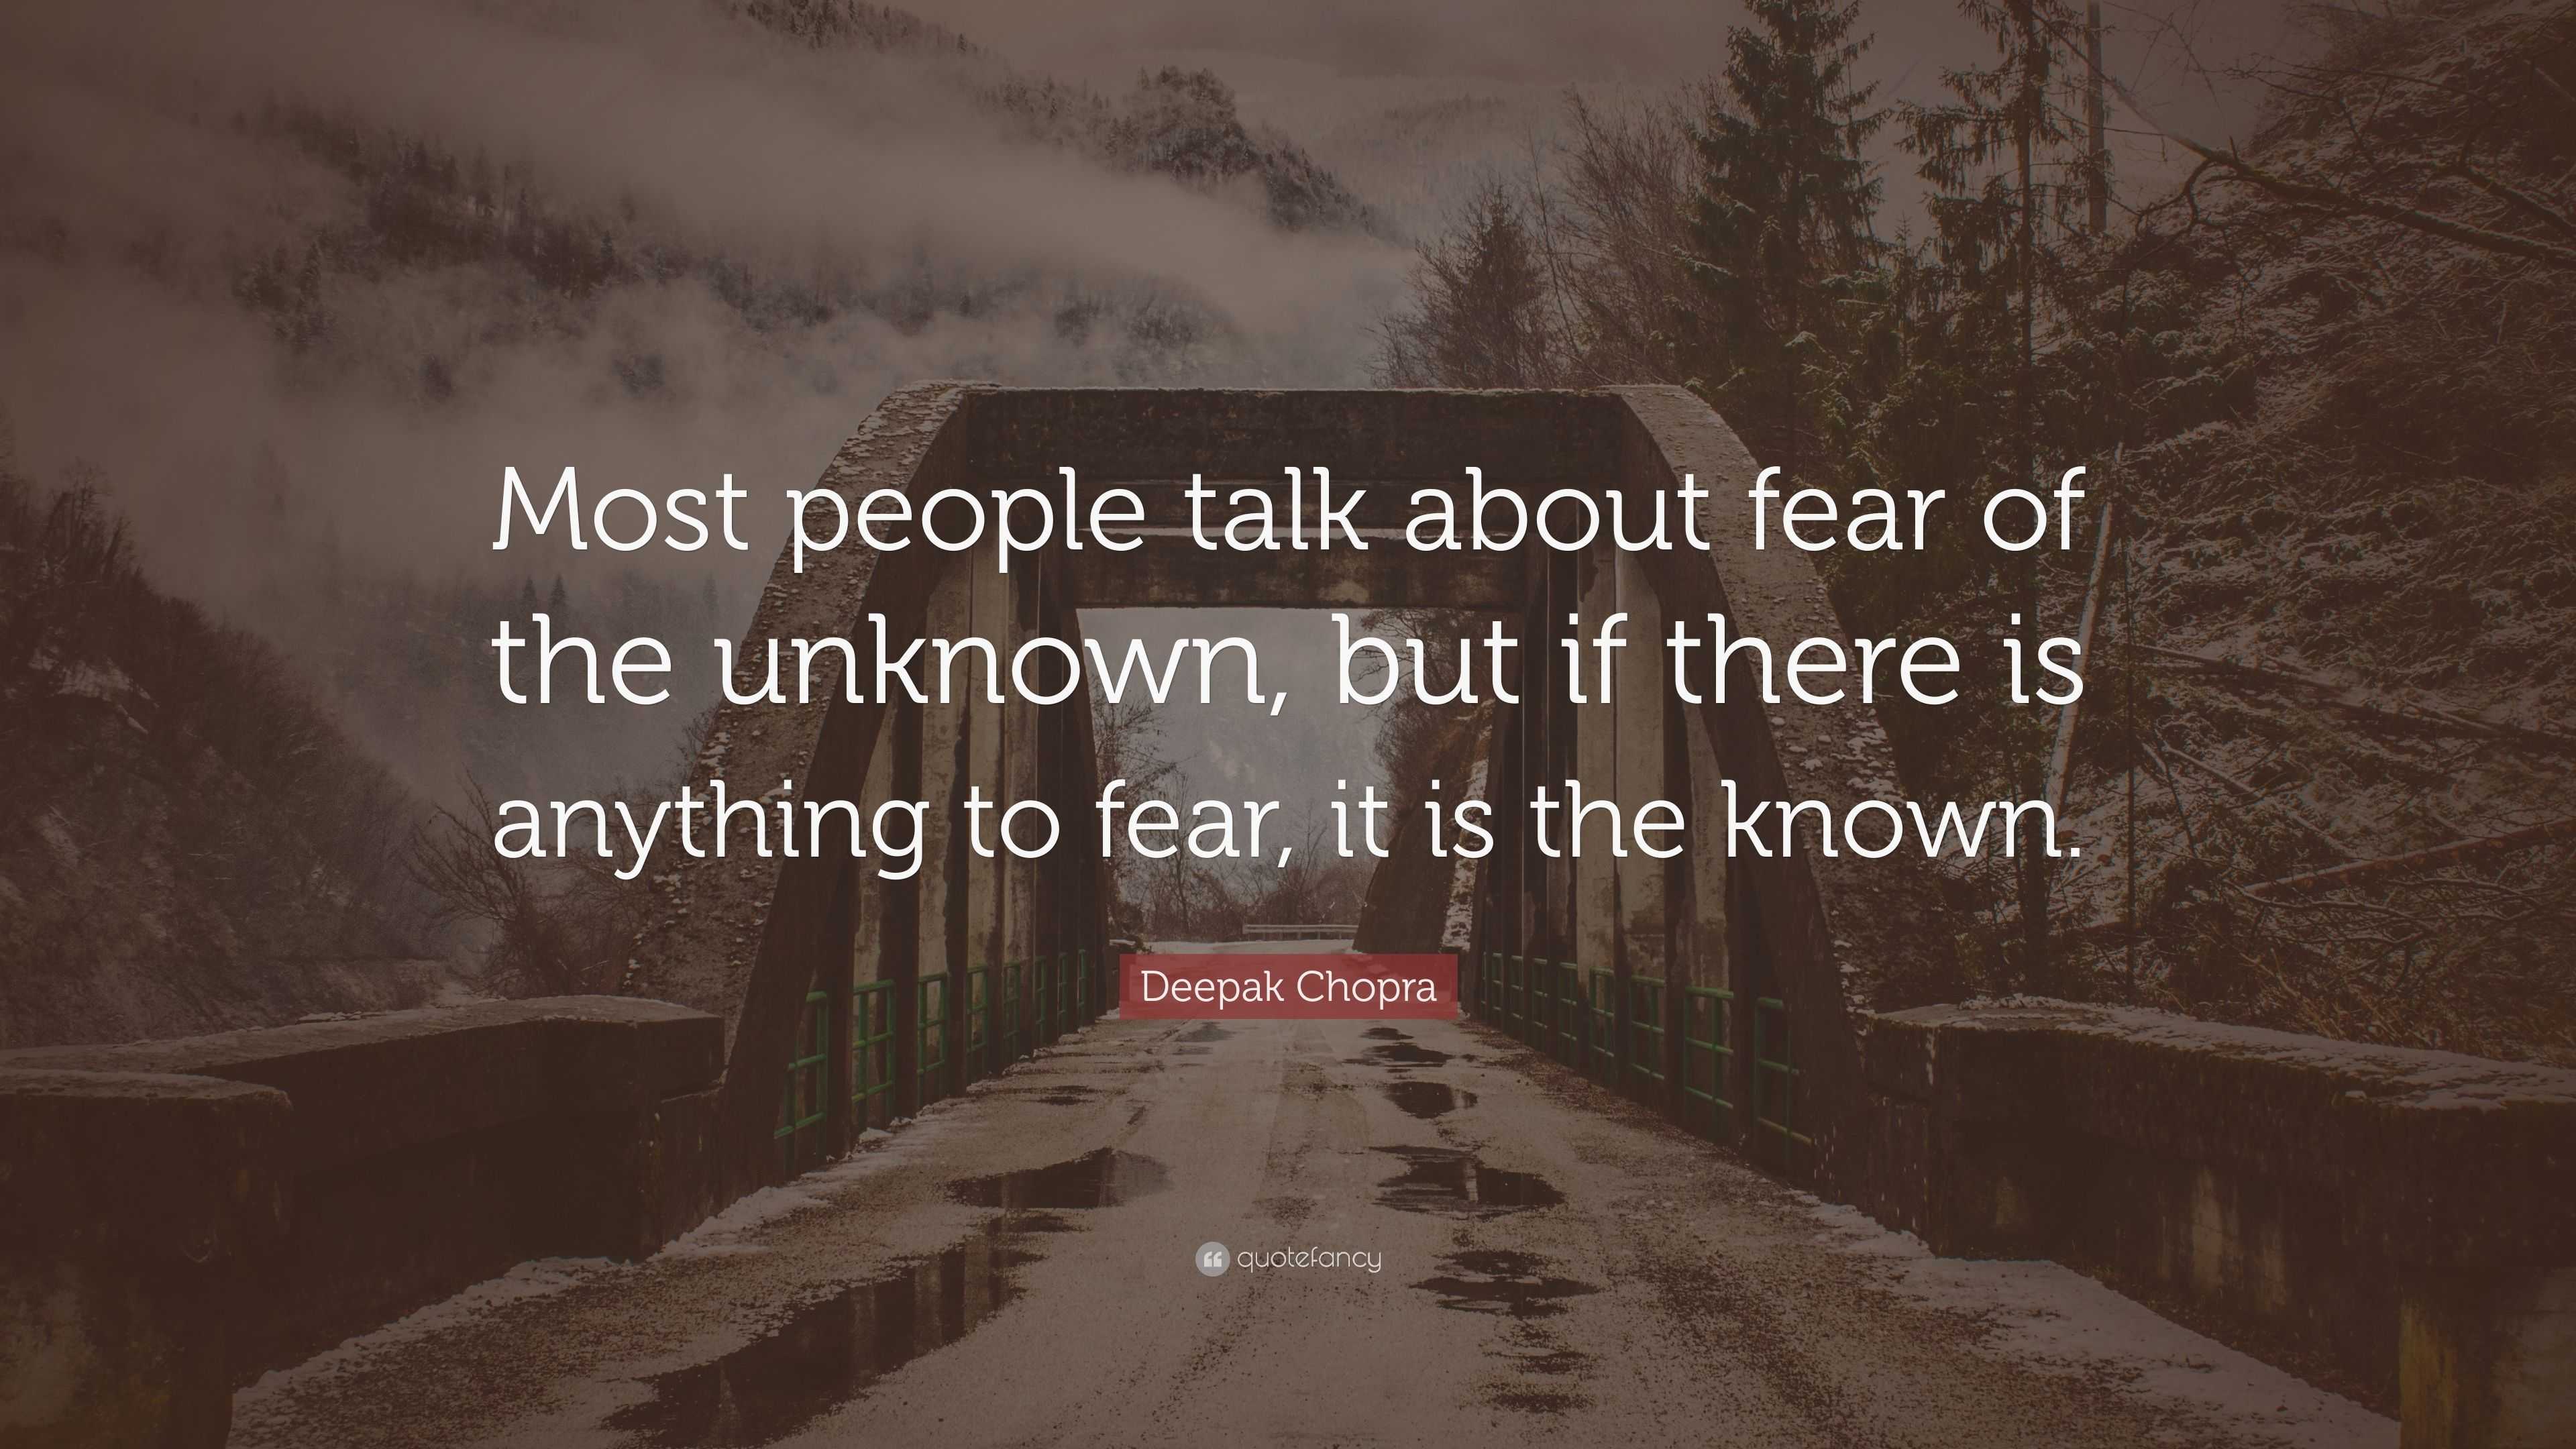 Deepak Chopra Quote: “Most people talk about fear of the unknown, but ...